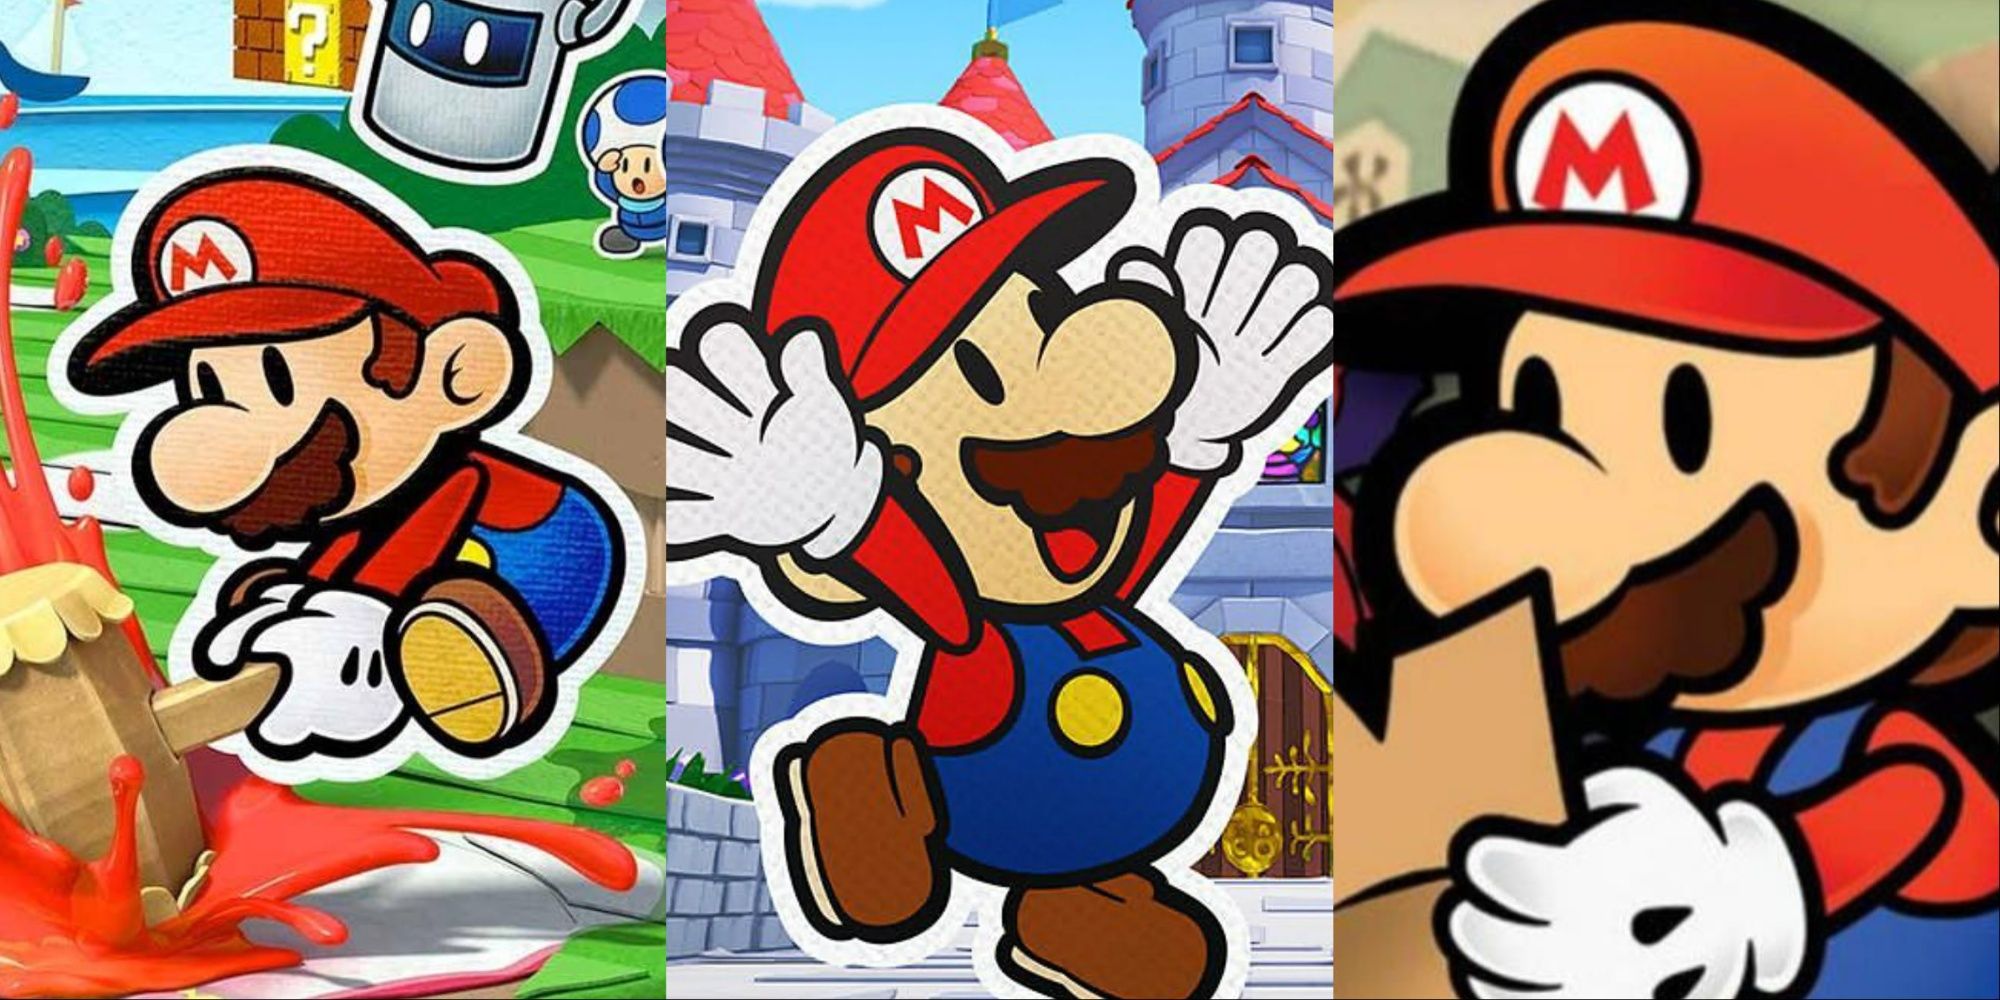 A collage showing Marios from three different Paper Mario games.